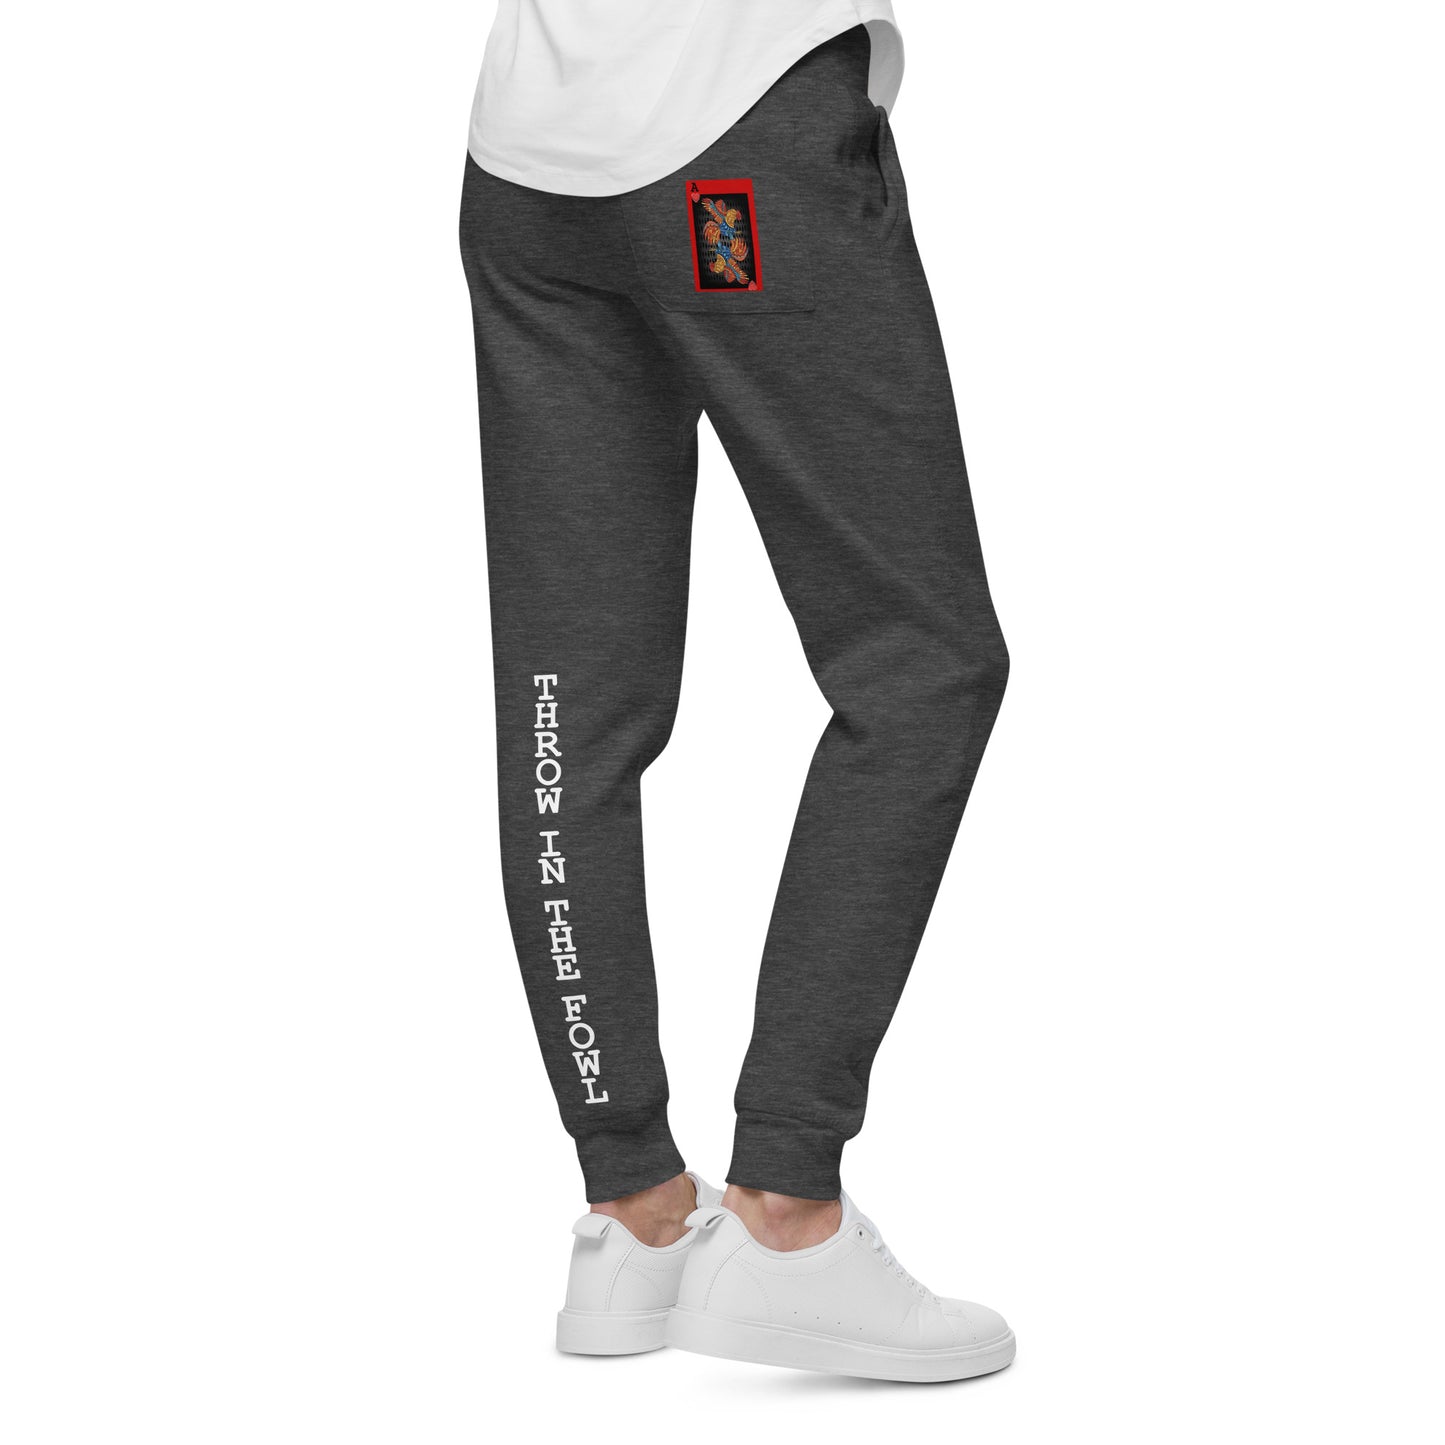 Unisex DECK OF CARDS ACE Gamefowl Rooster Sweatpants